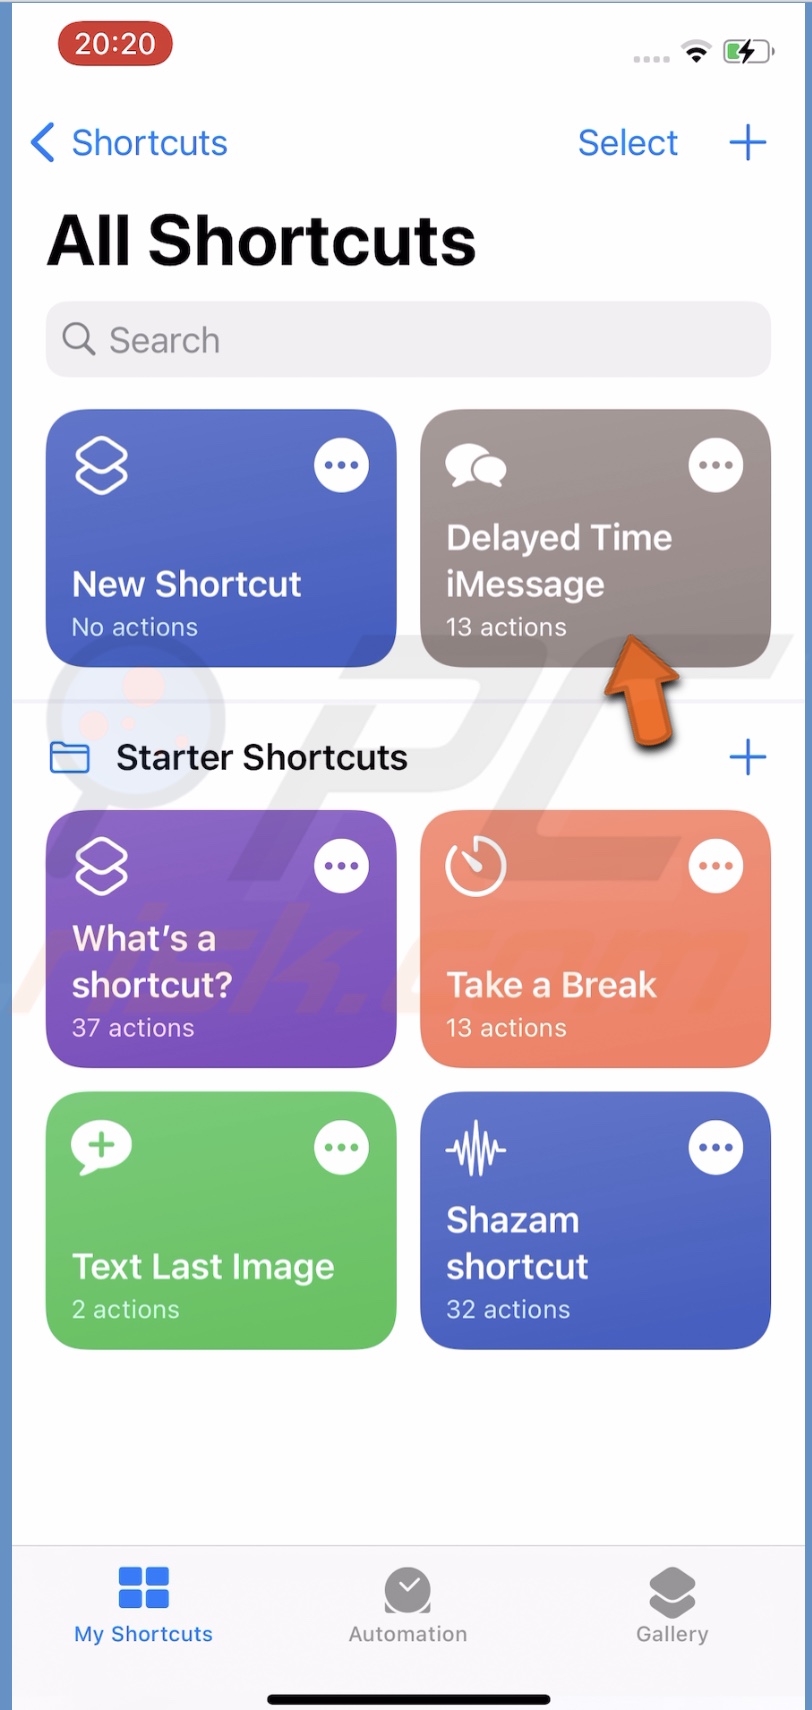 Tap on the Delayed Time shortcut